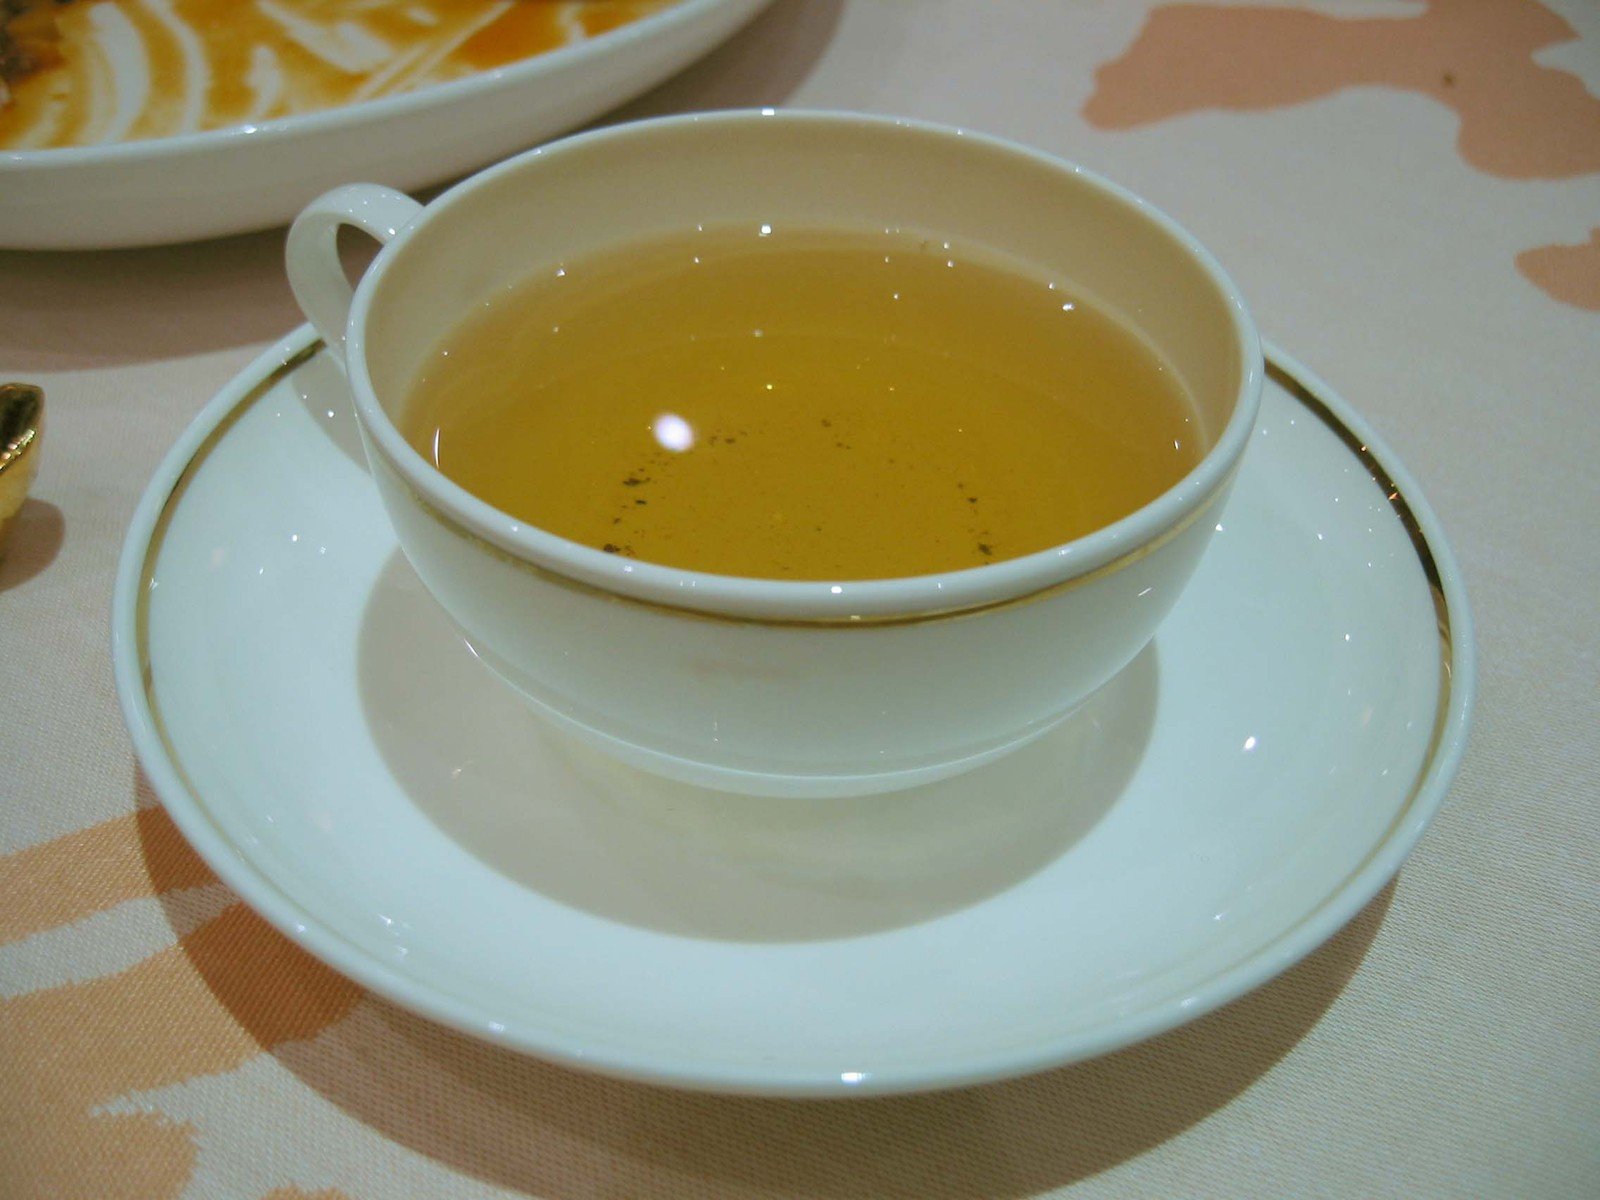 a white plate topped with a bowl filled with liquid